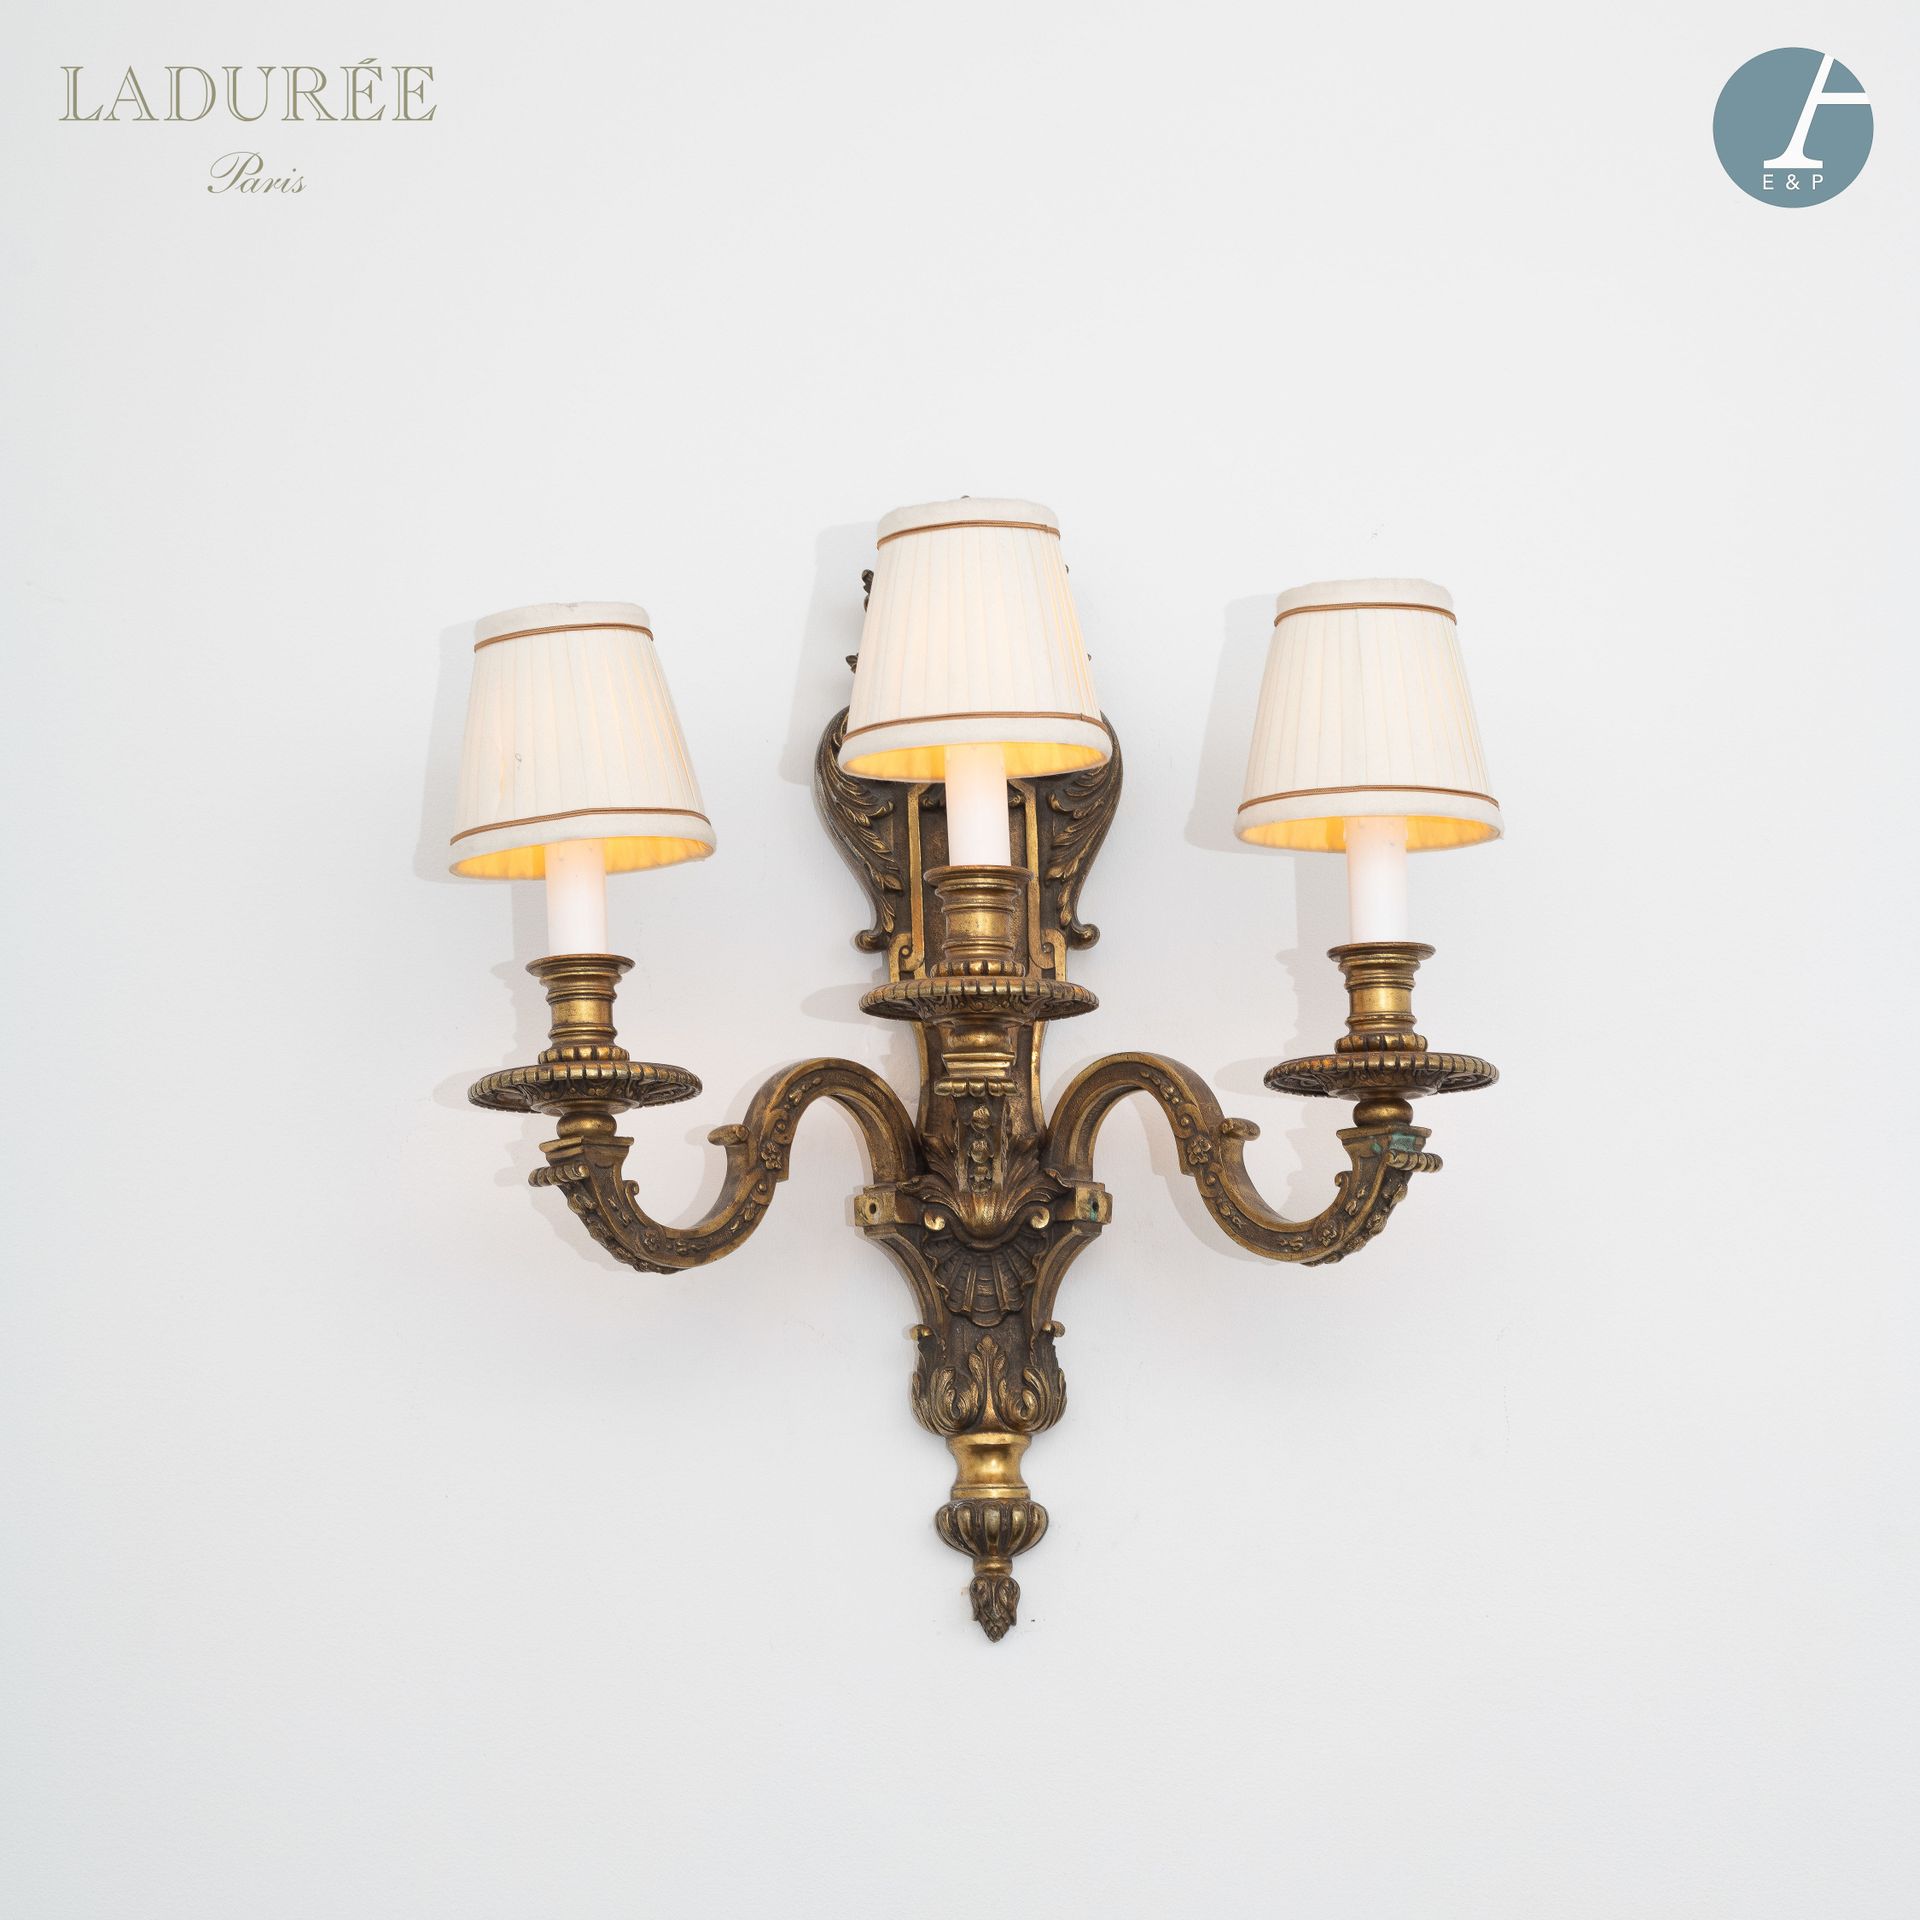 Null From the Maison Ladurée - Offices.

Wall lamp in bronze with three arms of &hellip;